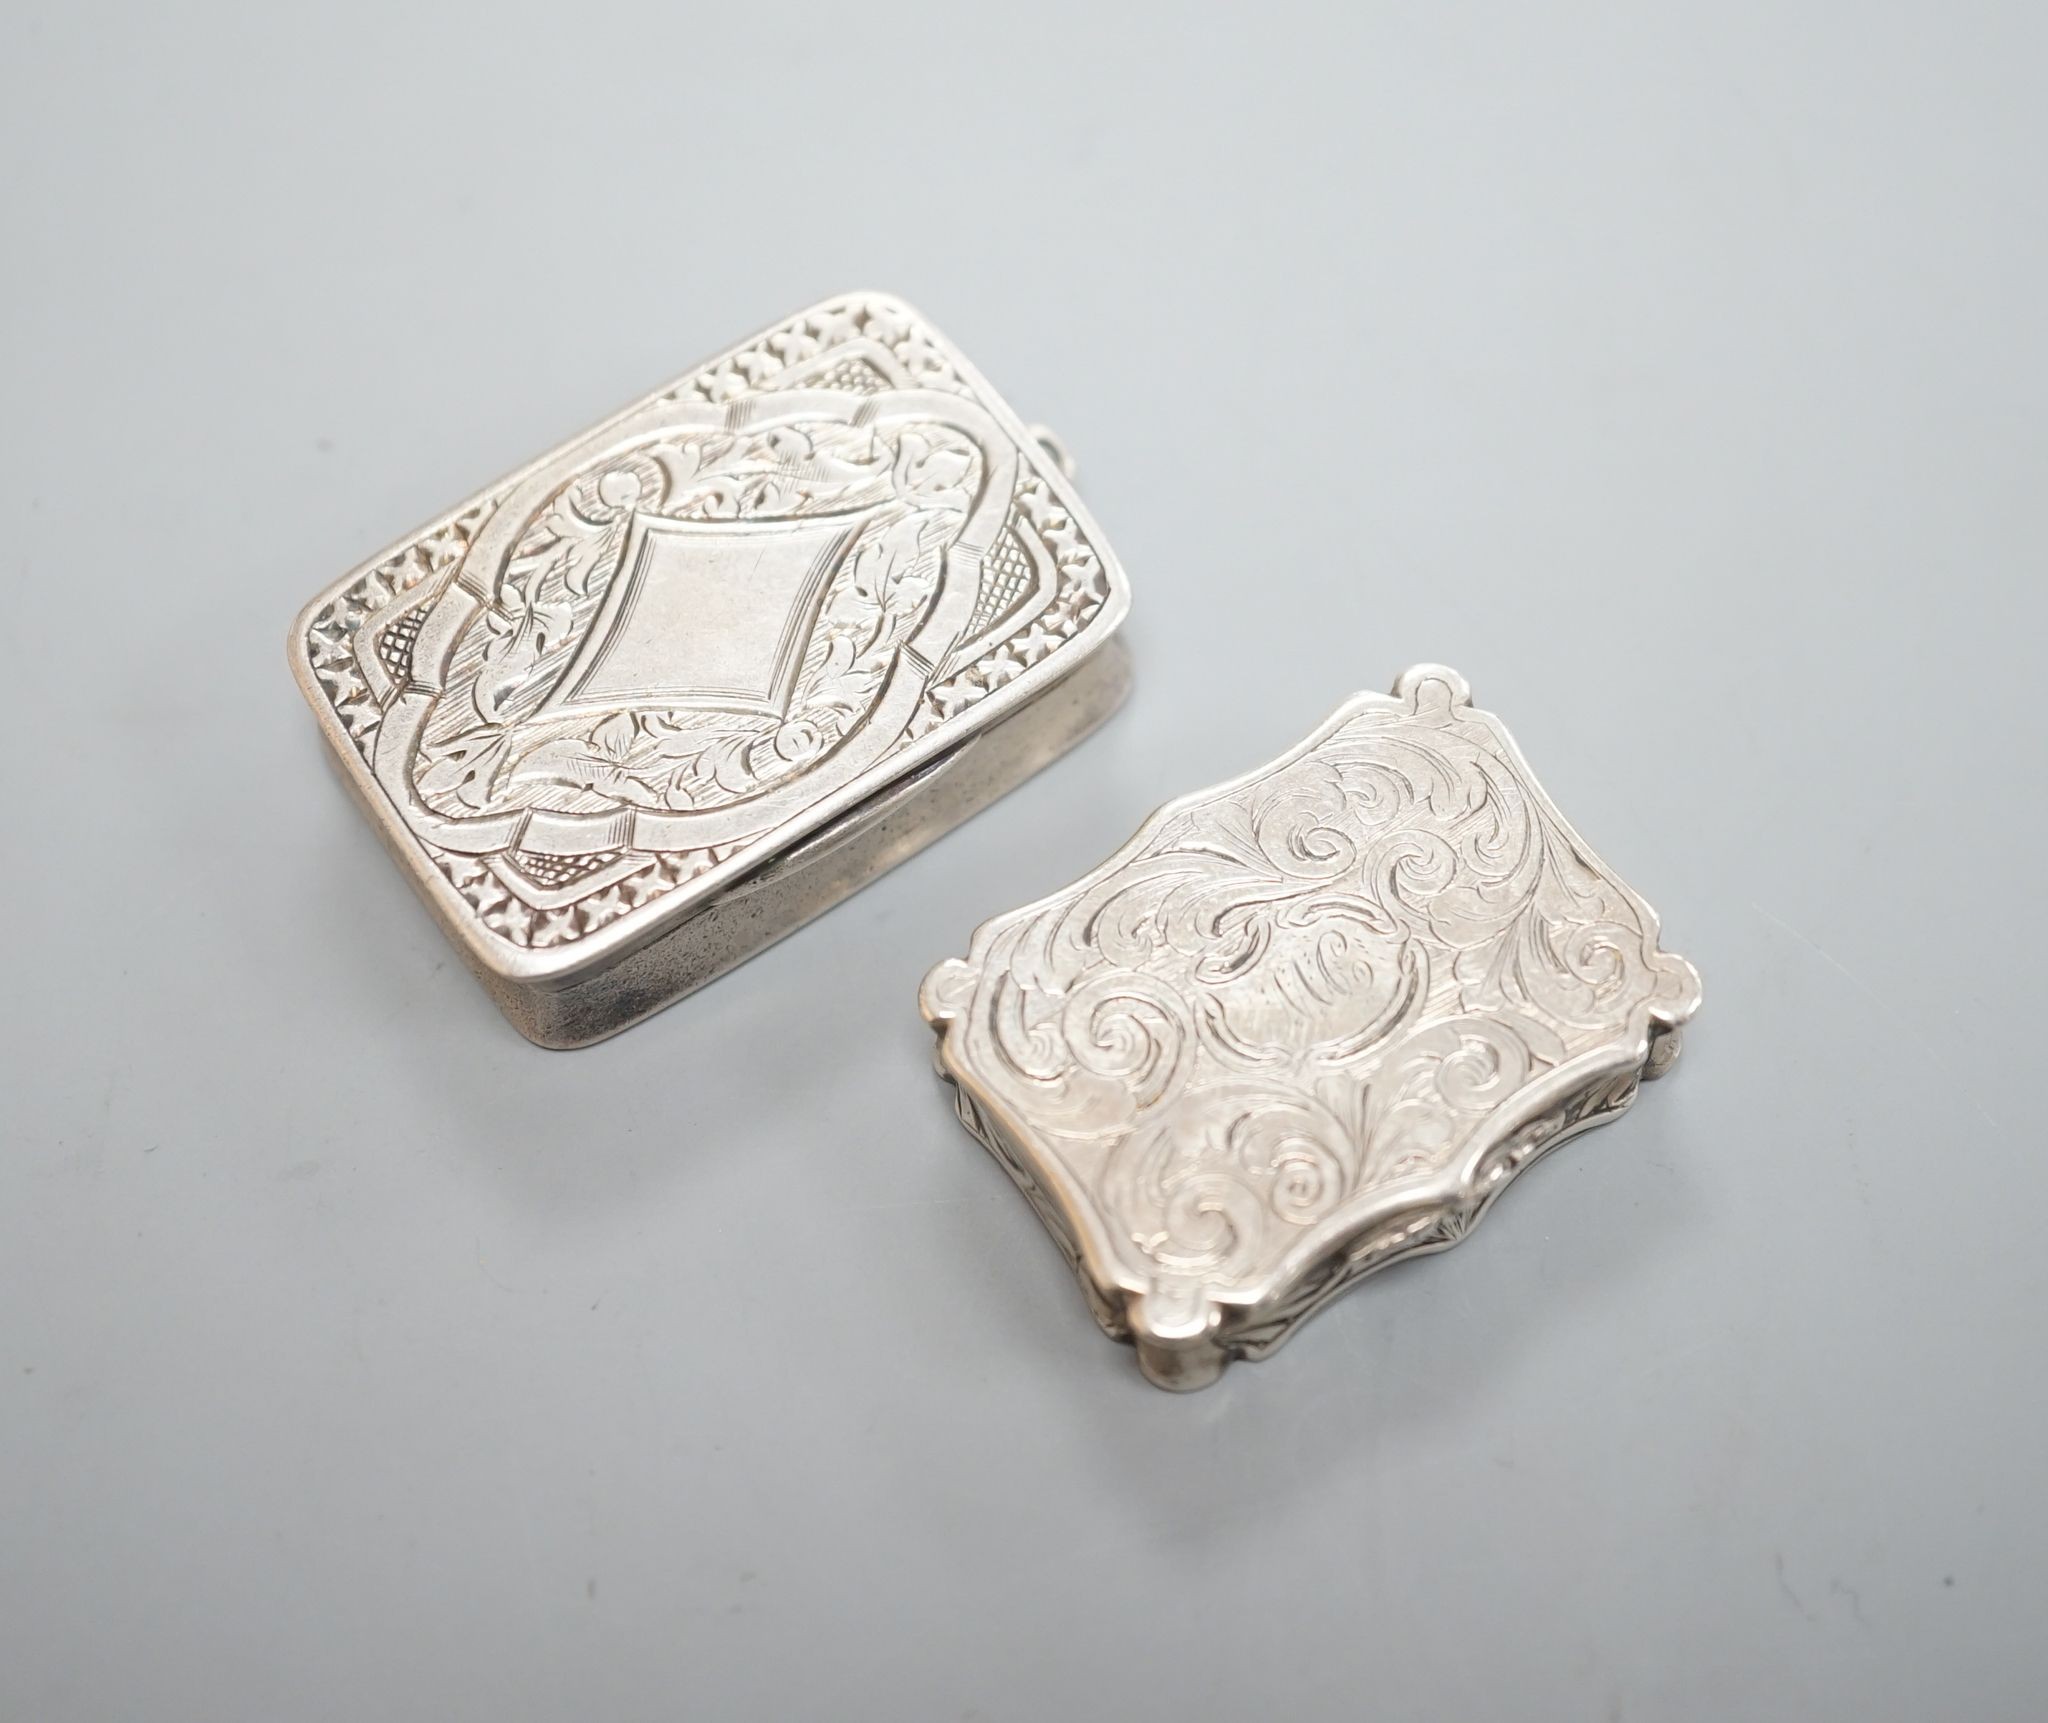 An early Victorian engraved silver shaped rectangular vinaigrette, by Nathaniel Mills, Birmingham, 1844, 31mm and a later silver vinaigrette by George Unite.